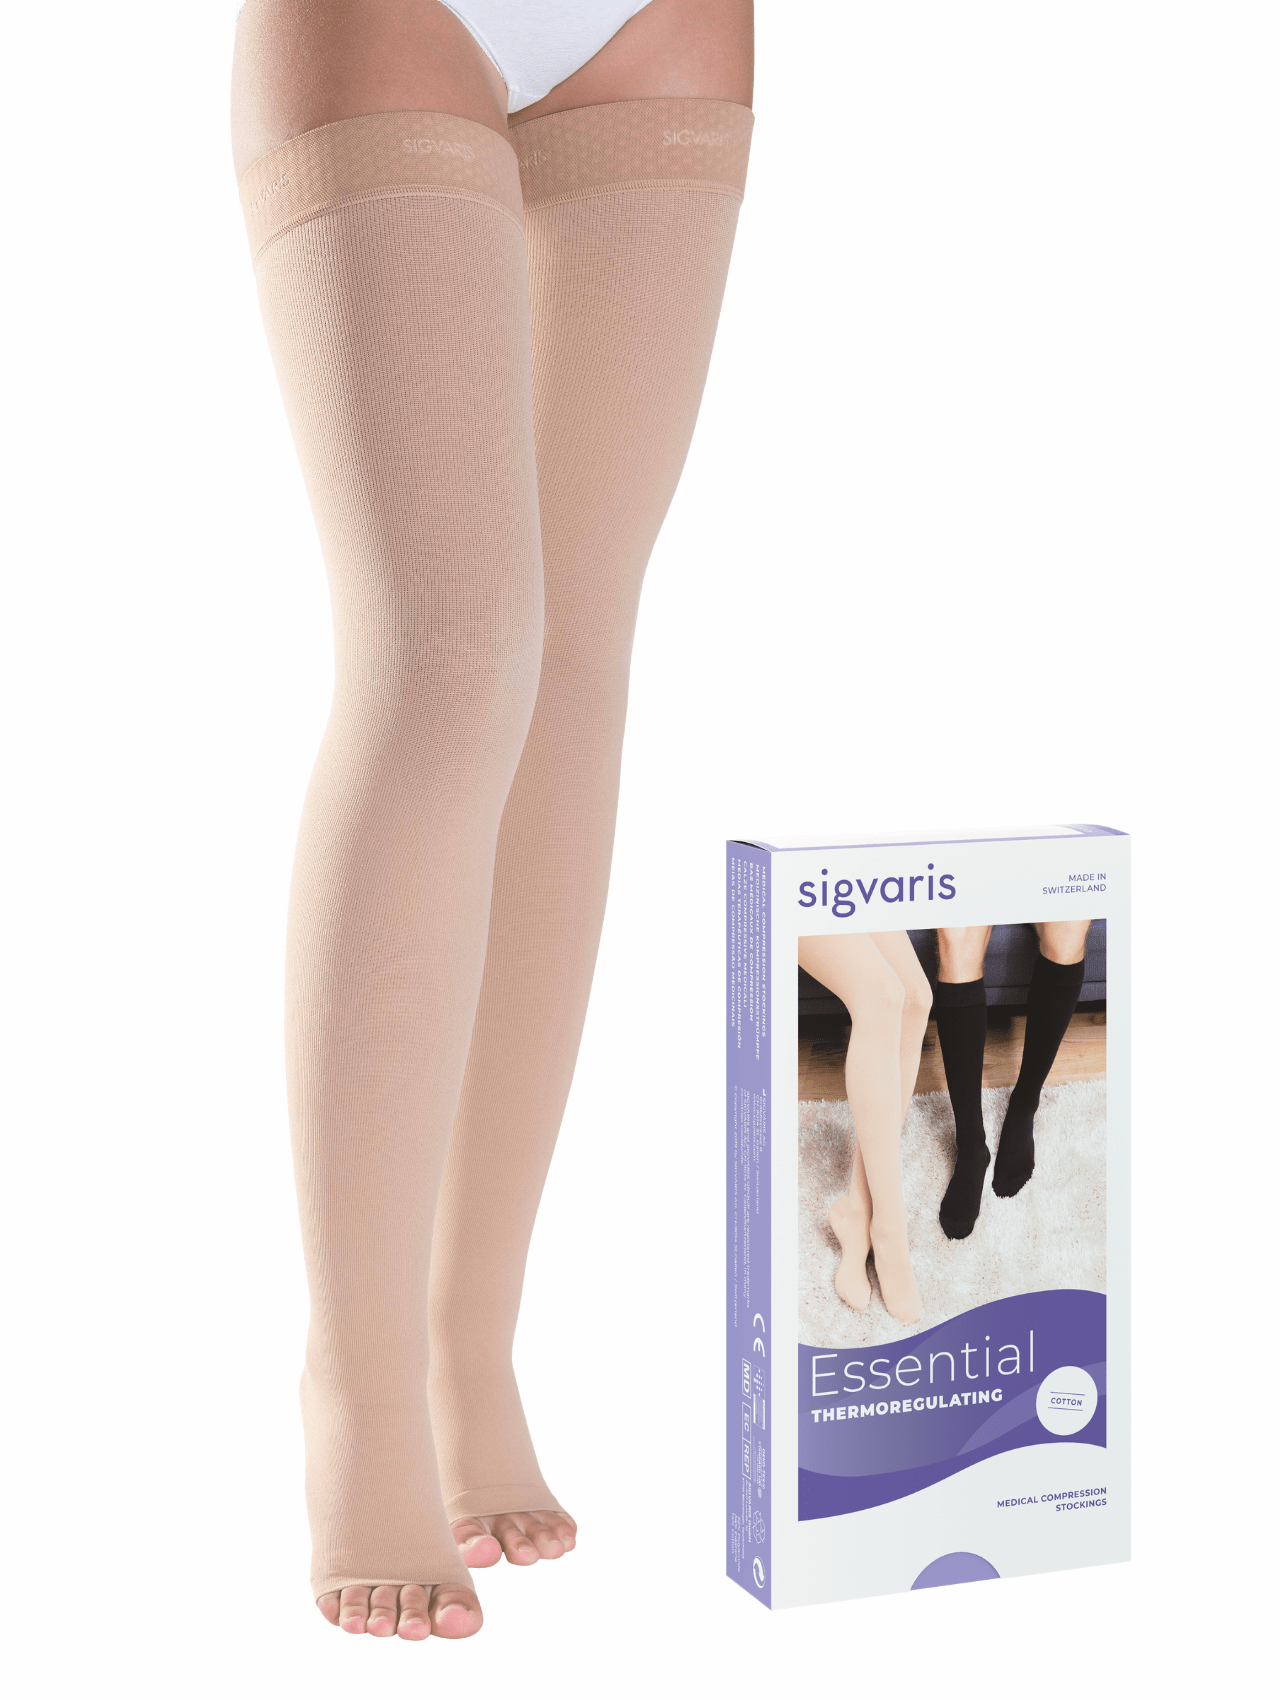 Class 1 Medical Compression for Thigh Length